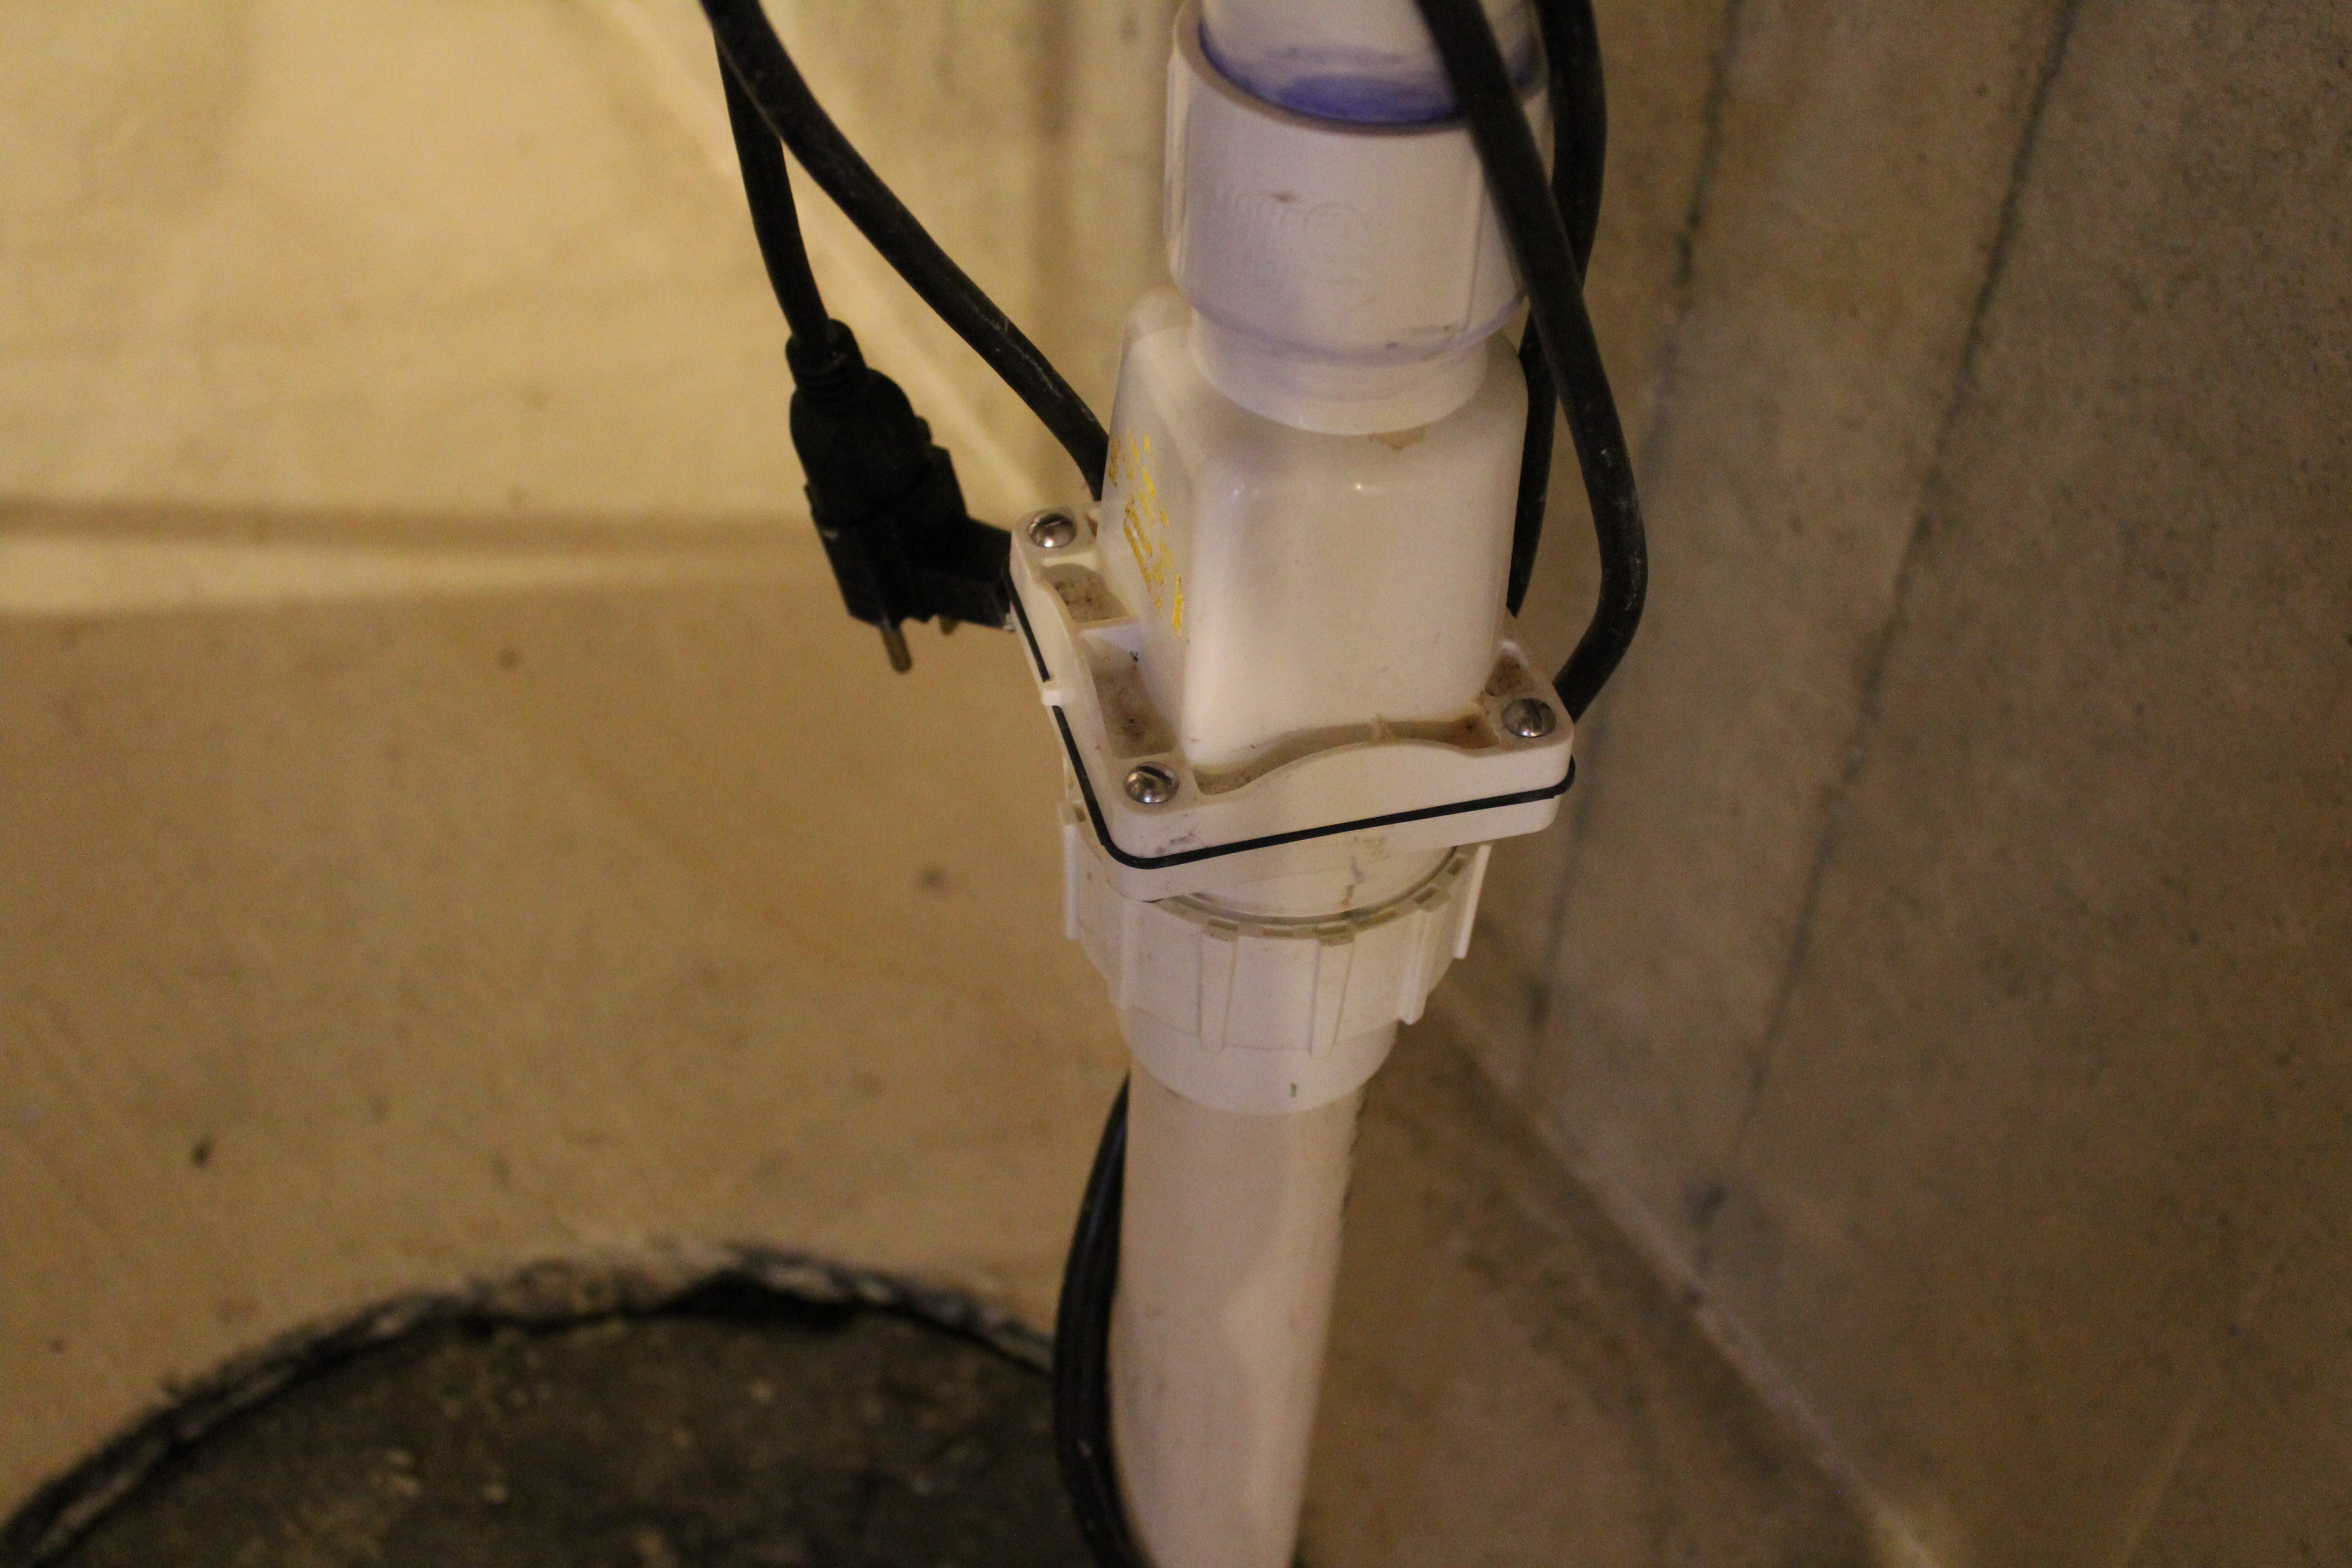 How to Replace a Broken Sump Pump by Our Home from Scratch | Bob Vila